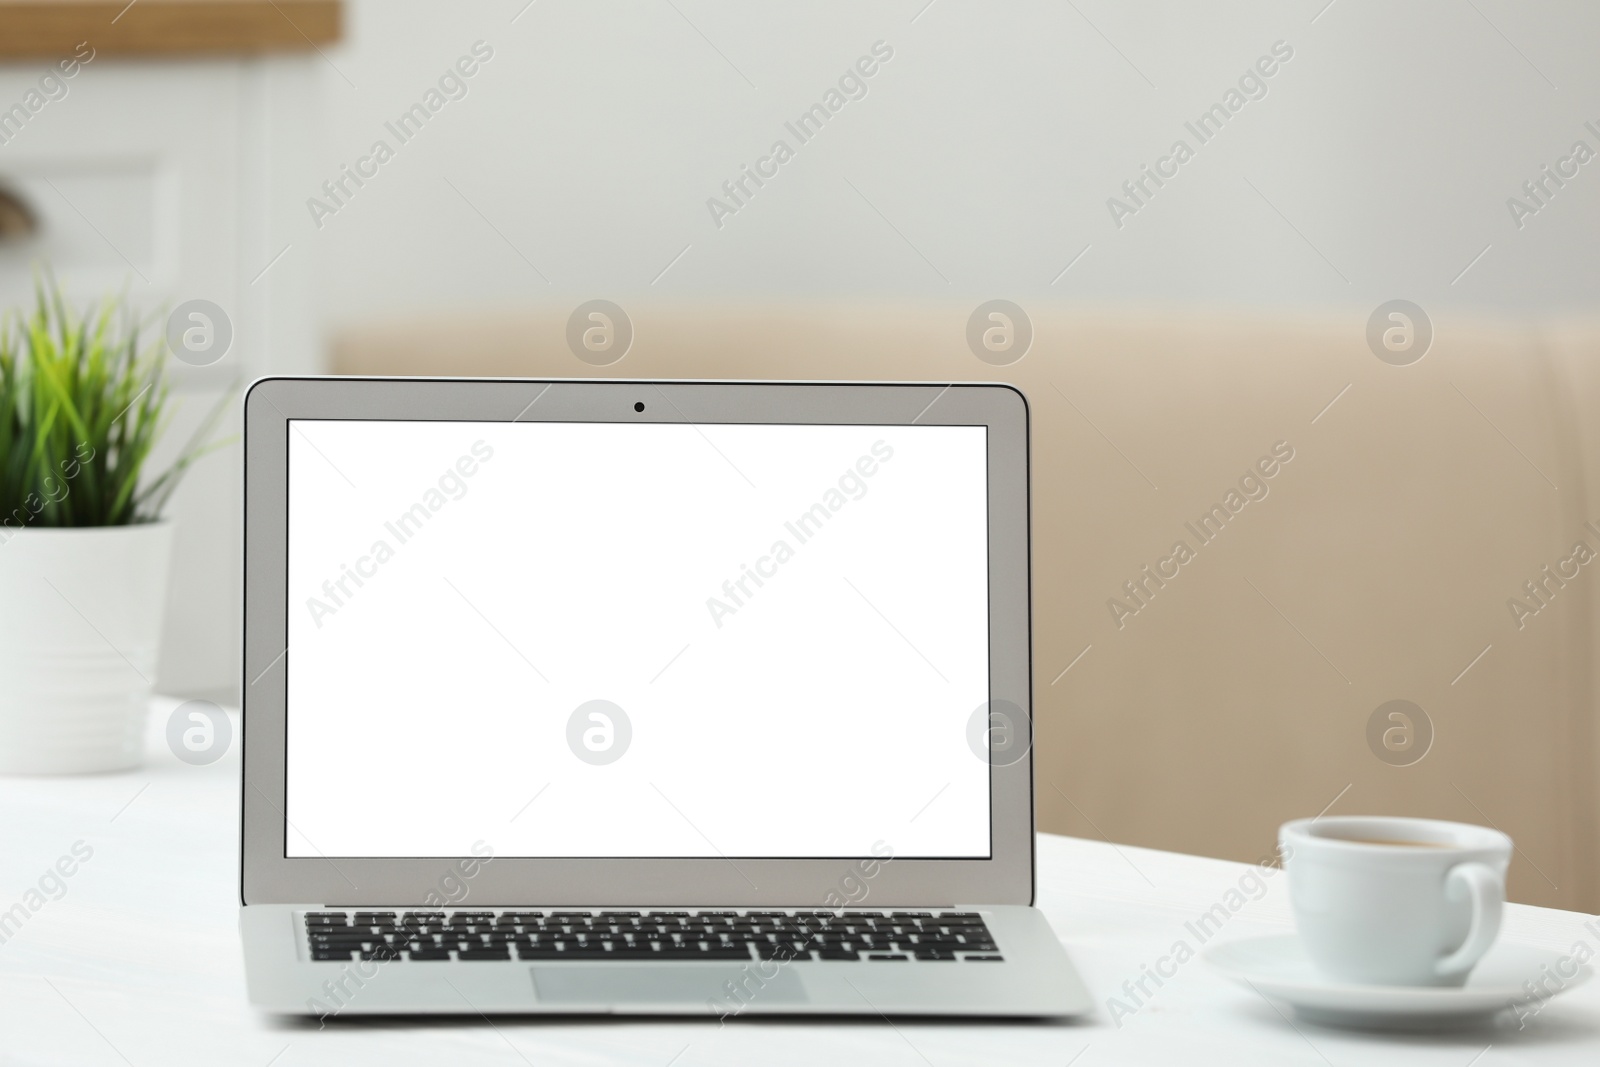 Photo of Laptop with blank screen on table indoors. Space for text